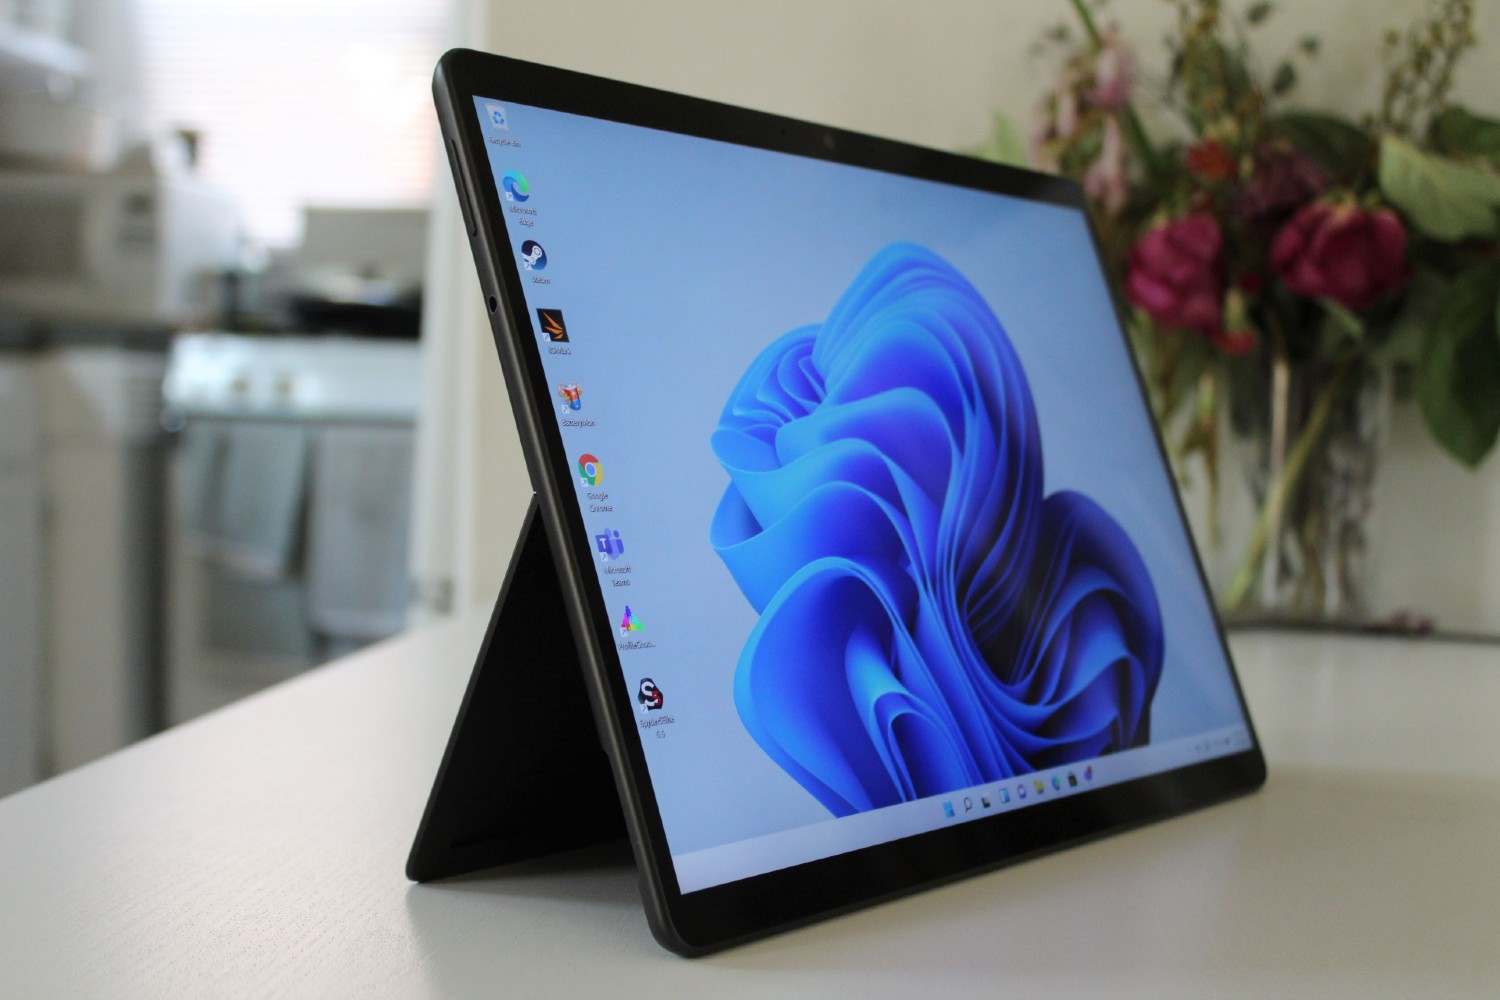 iPad Pro 12.9 inch (2021) review: Trying to Imitate Surface